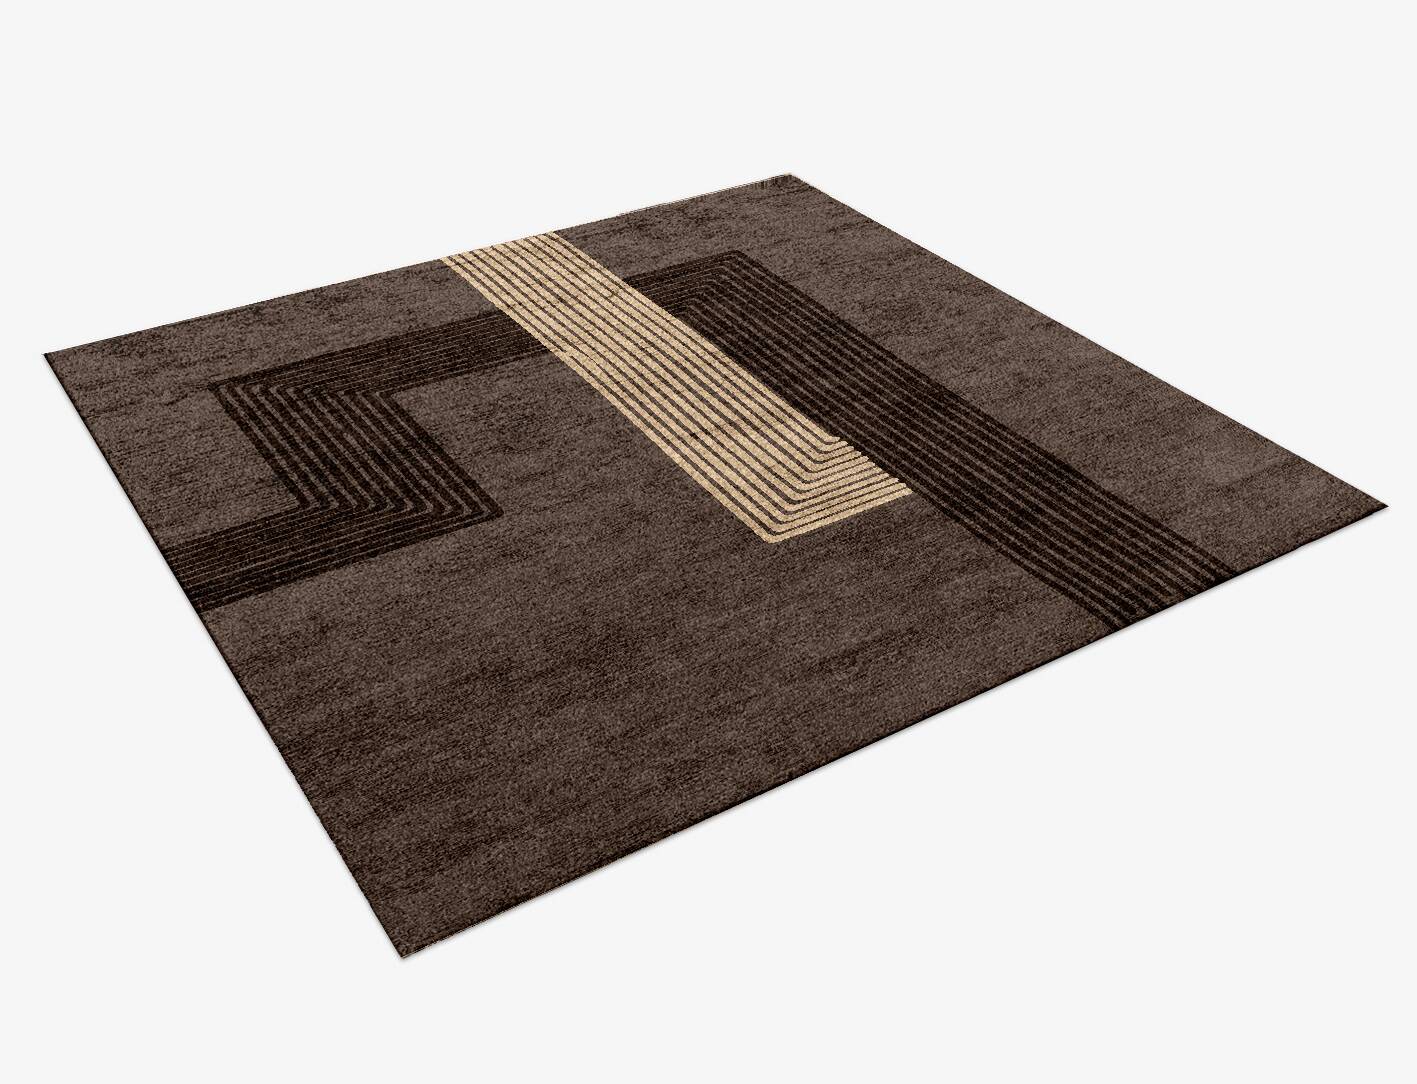 Surly Minimalist Square Hand Knotted Bamboo Silk Custom Rug by Rug Artisan